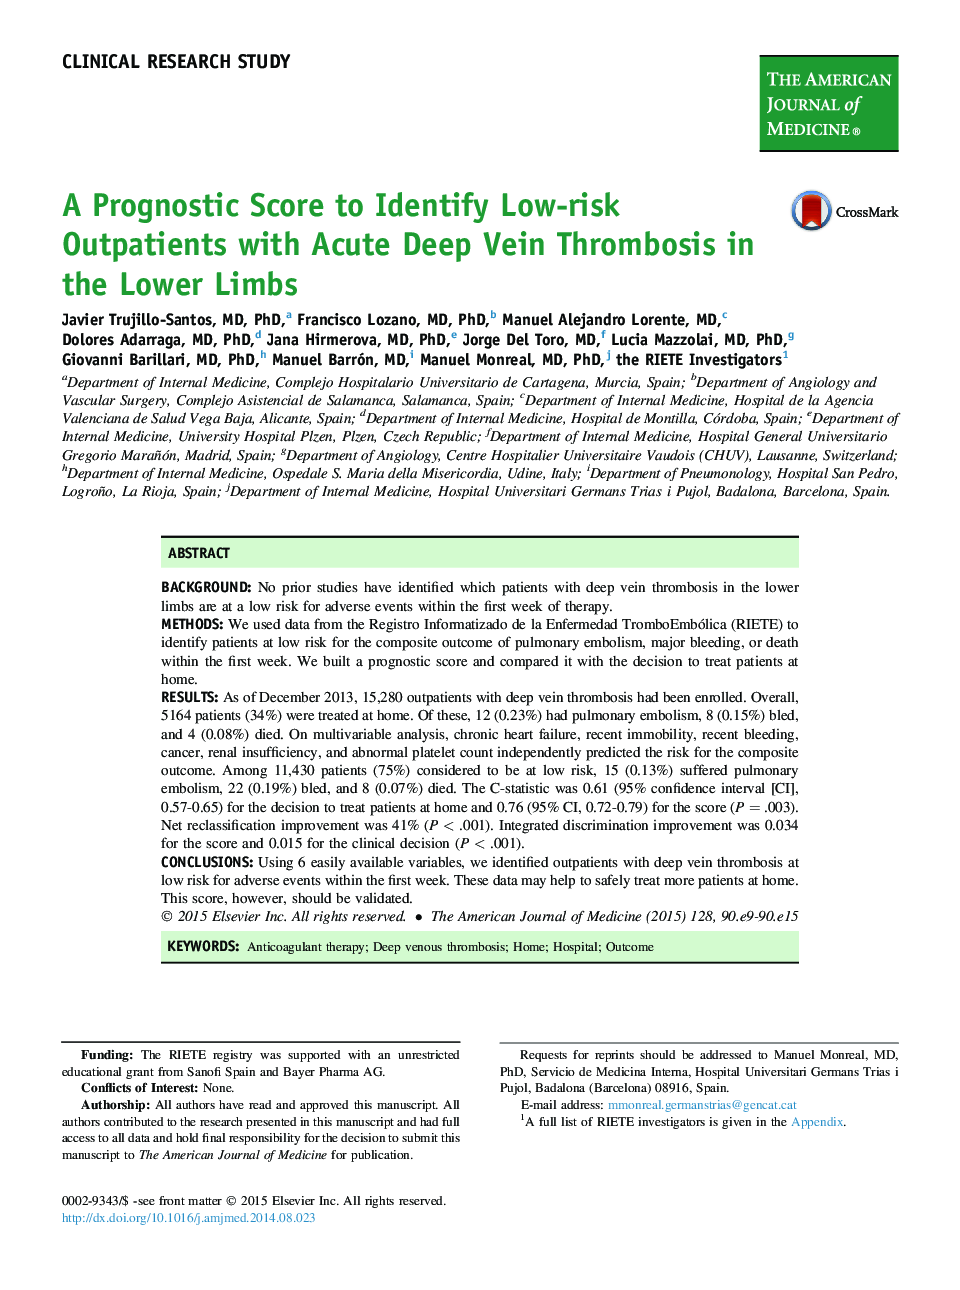 A Prognostic Score to Identify Low-risk Outpatients with Acute Deep Vein Thrombosis in the Lower Limbs